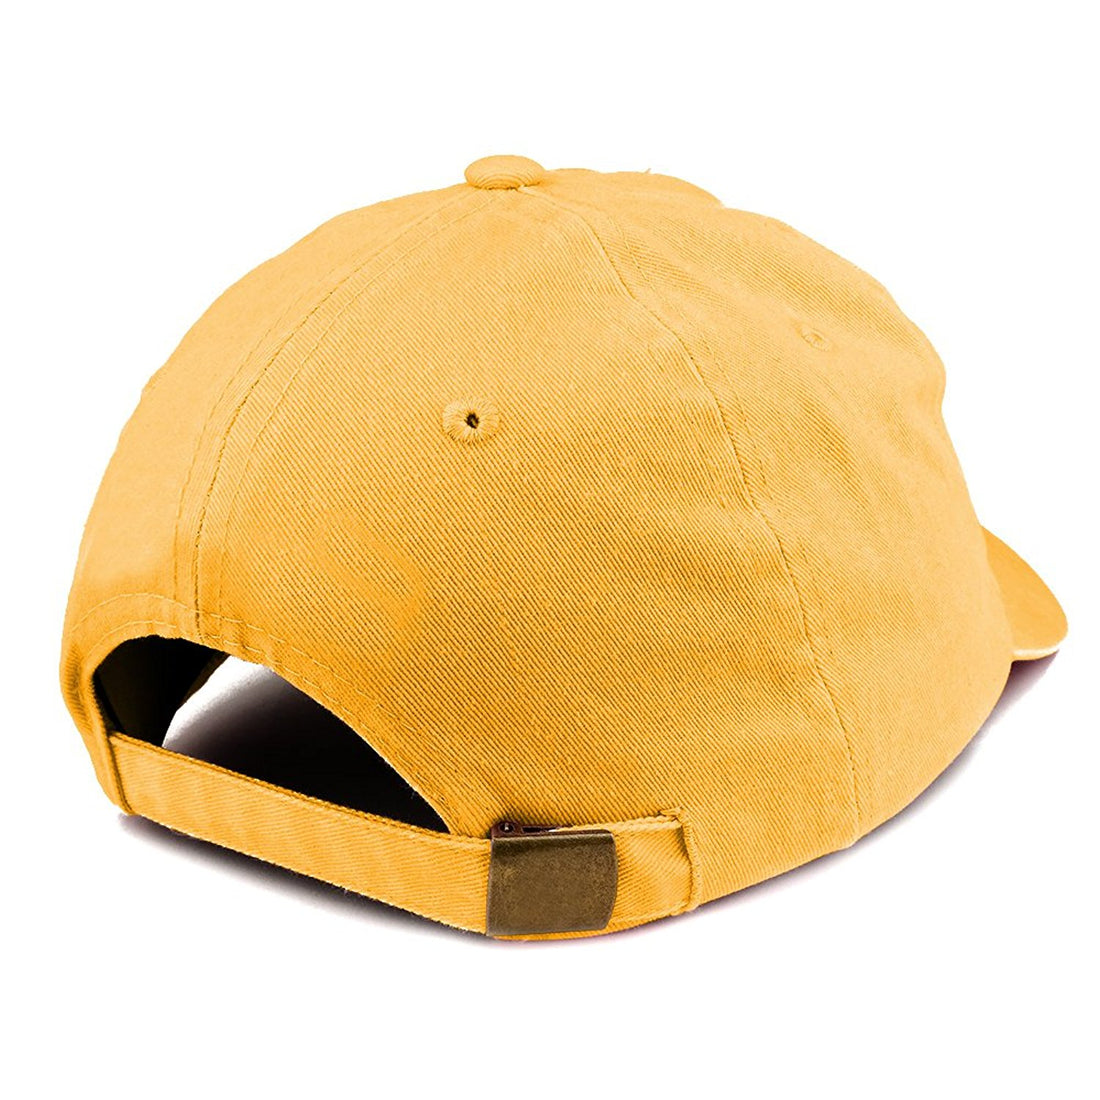 Trendy Apparel Shop Established 1949 Embroidered 70th Birthday Gift Pigment Dyed Washed Cotton Cap